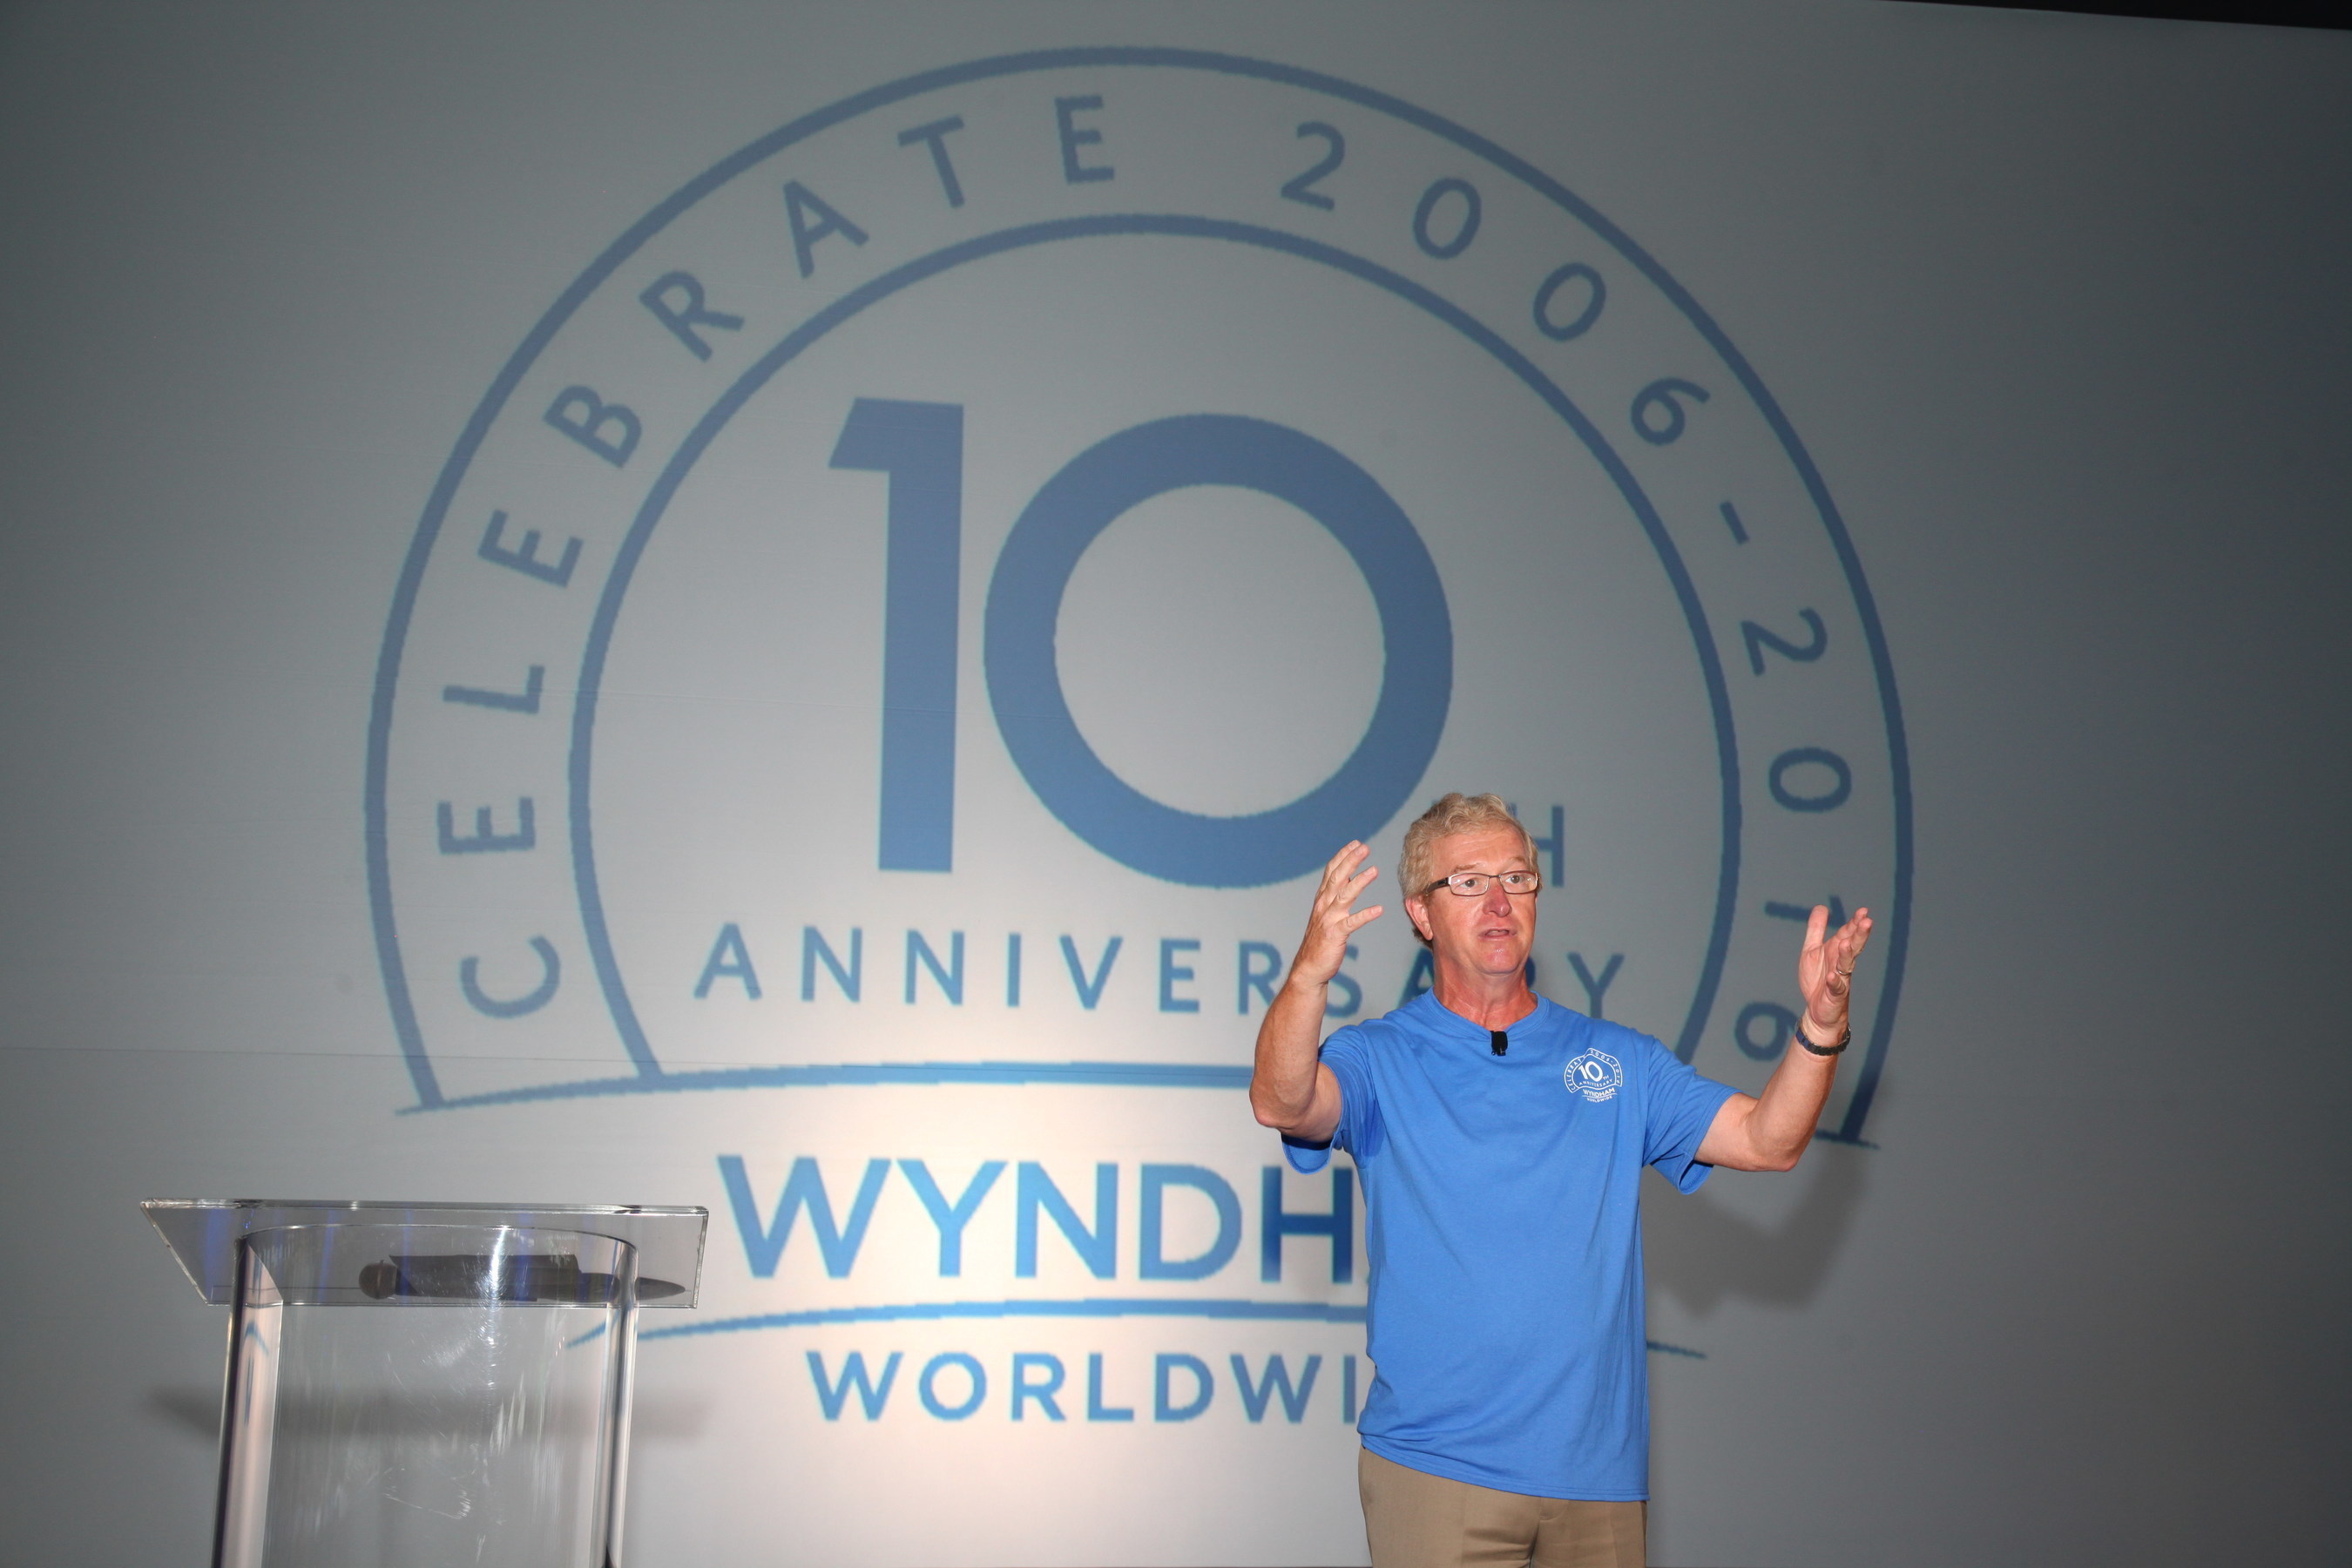 Wyndham Worldwide Chairman and Chief Executive Officer Stephen P. Holmes welcomes associates at a special 10 year anniversary celebration announcing its new global partnership with Save the Children at the company's global headquarters in Parsippany, NJ.